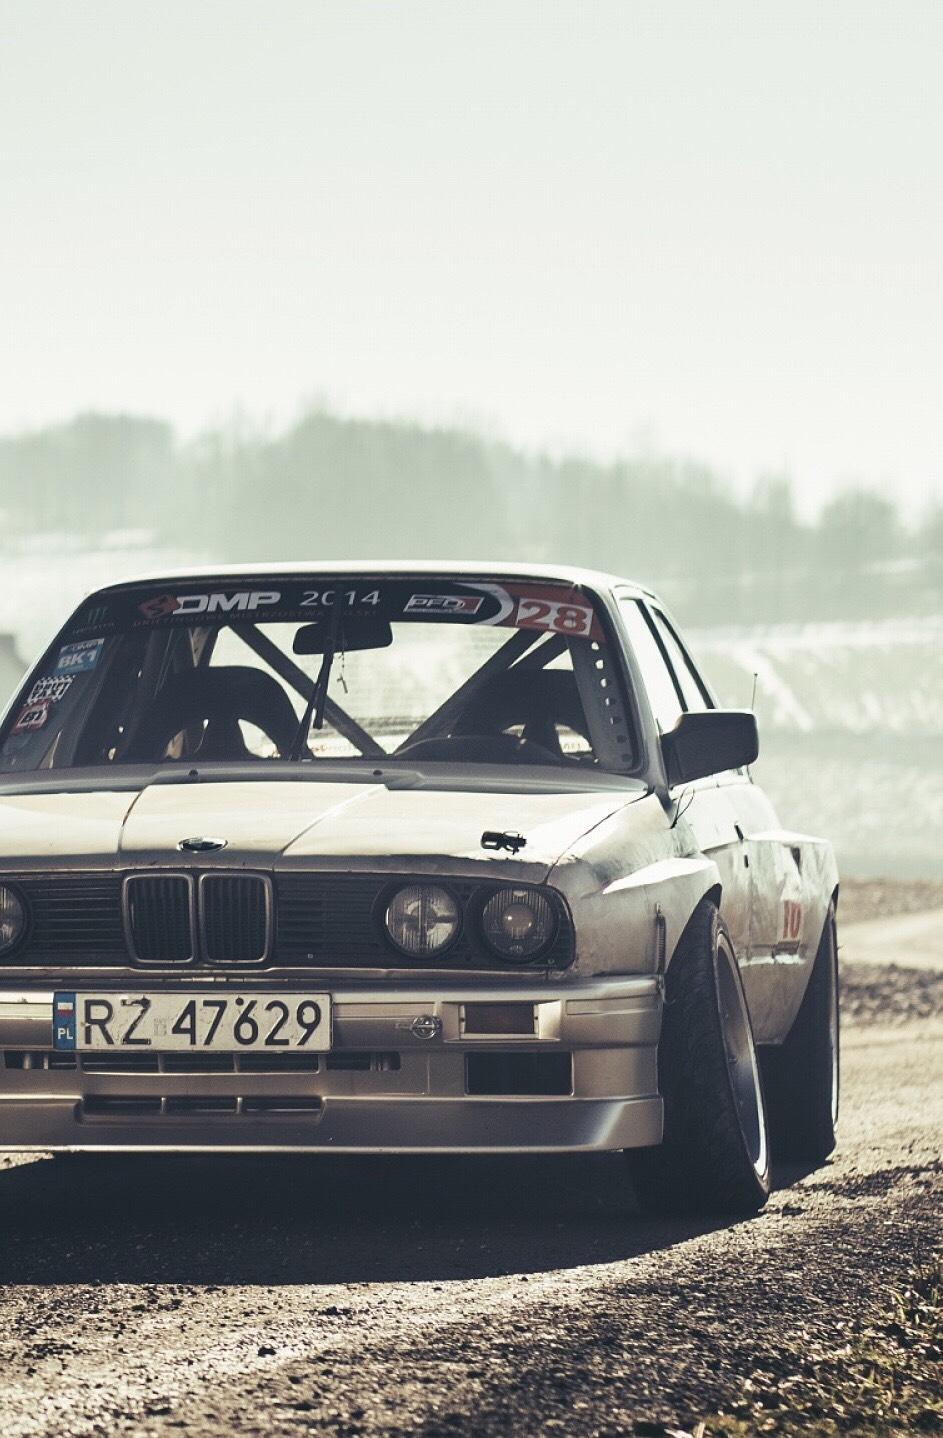 Any BMW E30 wallpaper for phone?